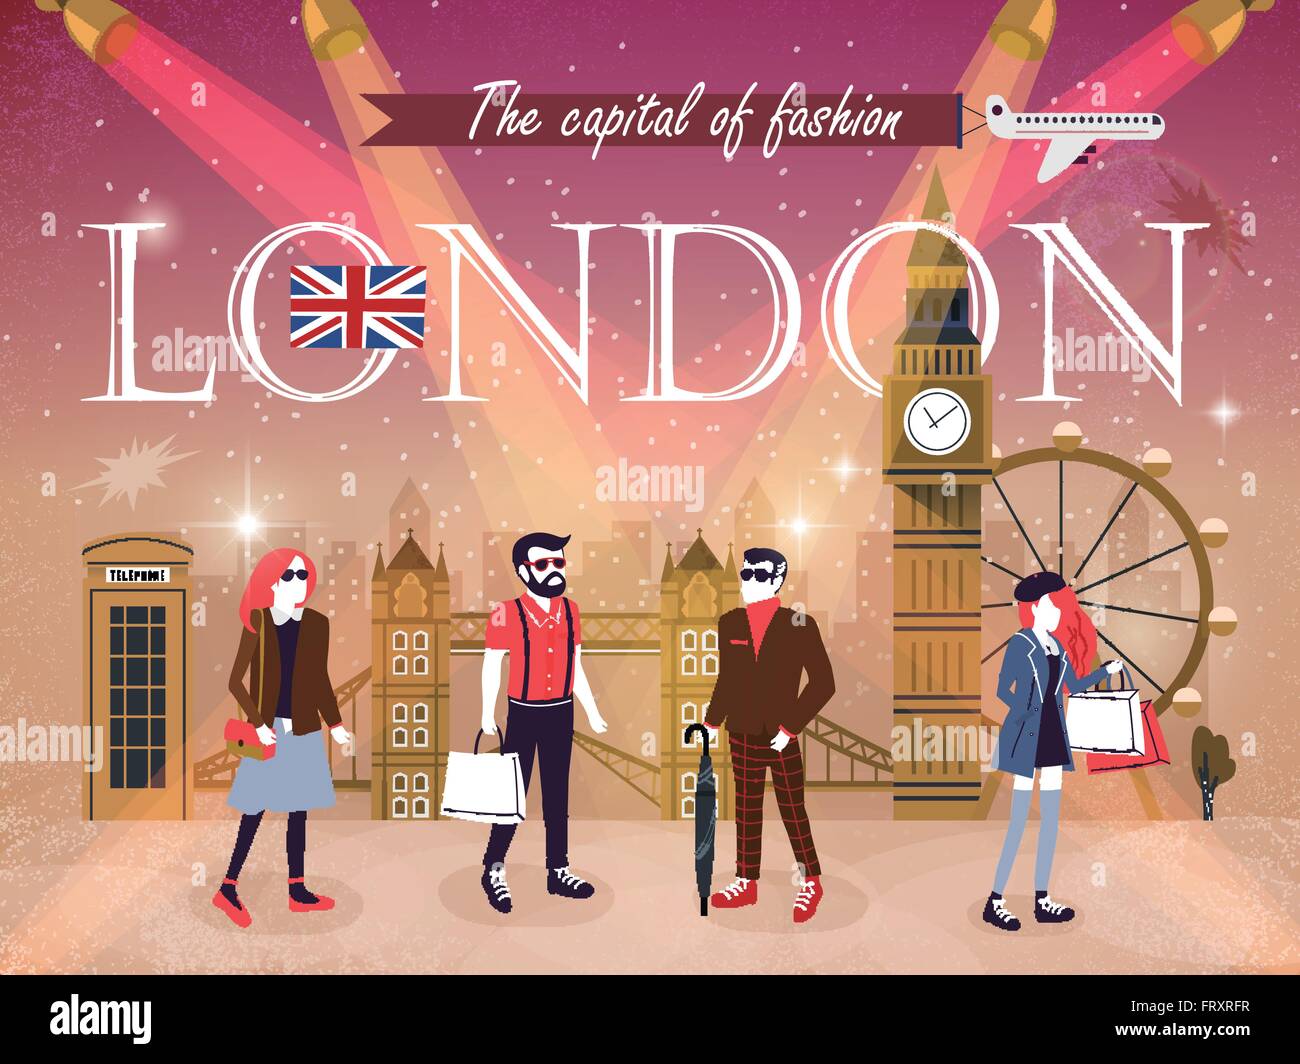 London fashion capital advertising poster with models and attractions Stock Vector